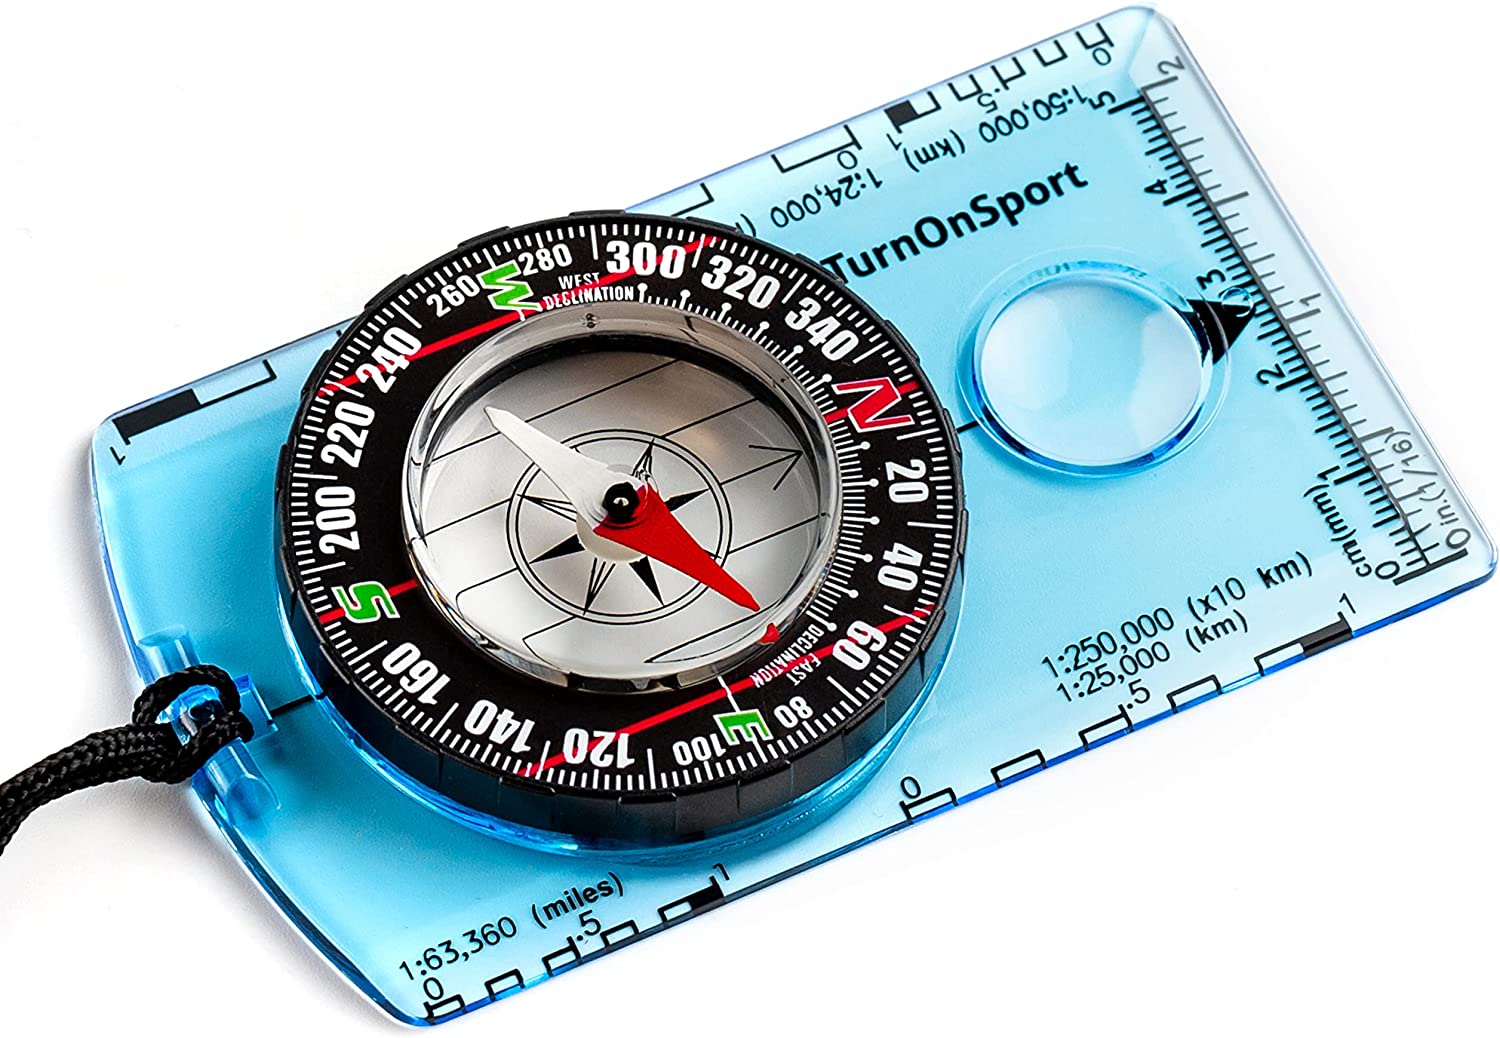 Orienteering Compass Hiking Backpacking Compass | Advanced Scout Compass Camping Navigation – Boy Scout Compass for Kids | Professional Field Compass for Map Reading – Best TurnOnSport Survival Gifts